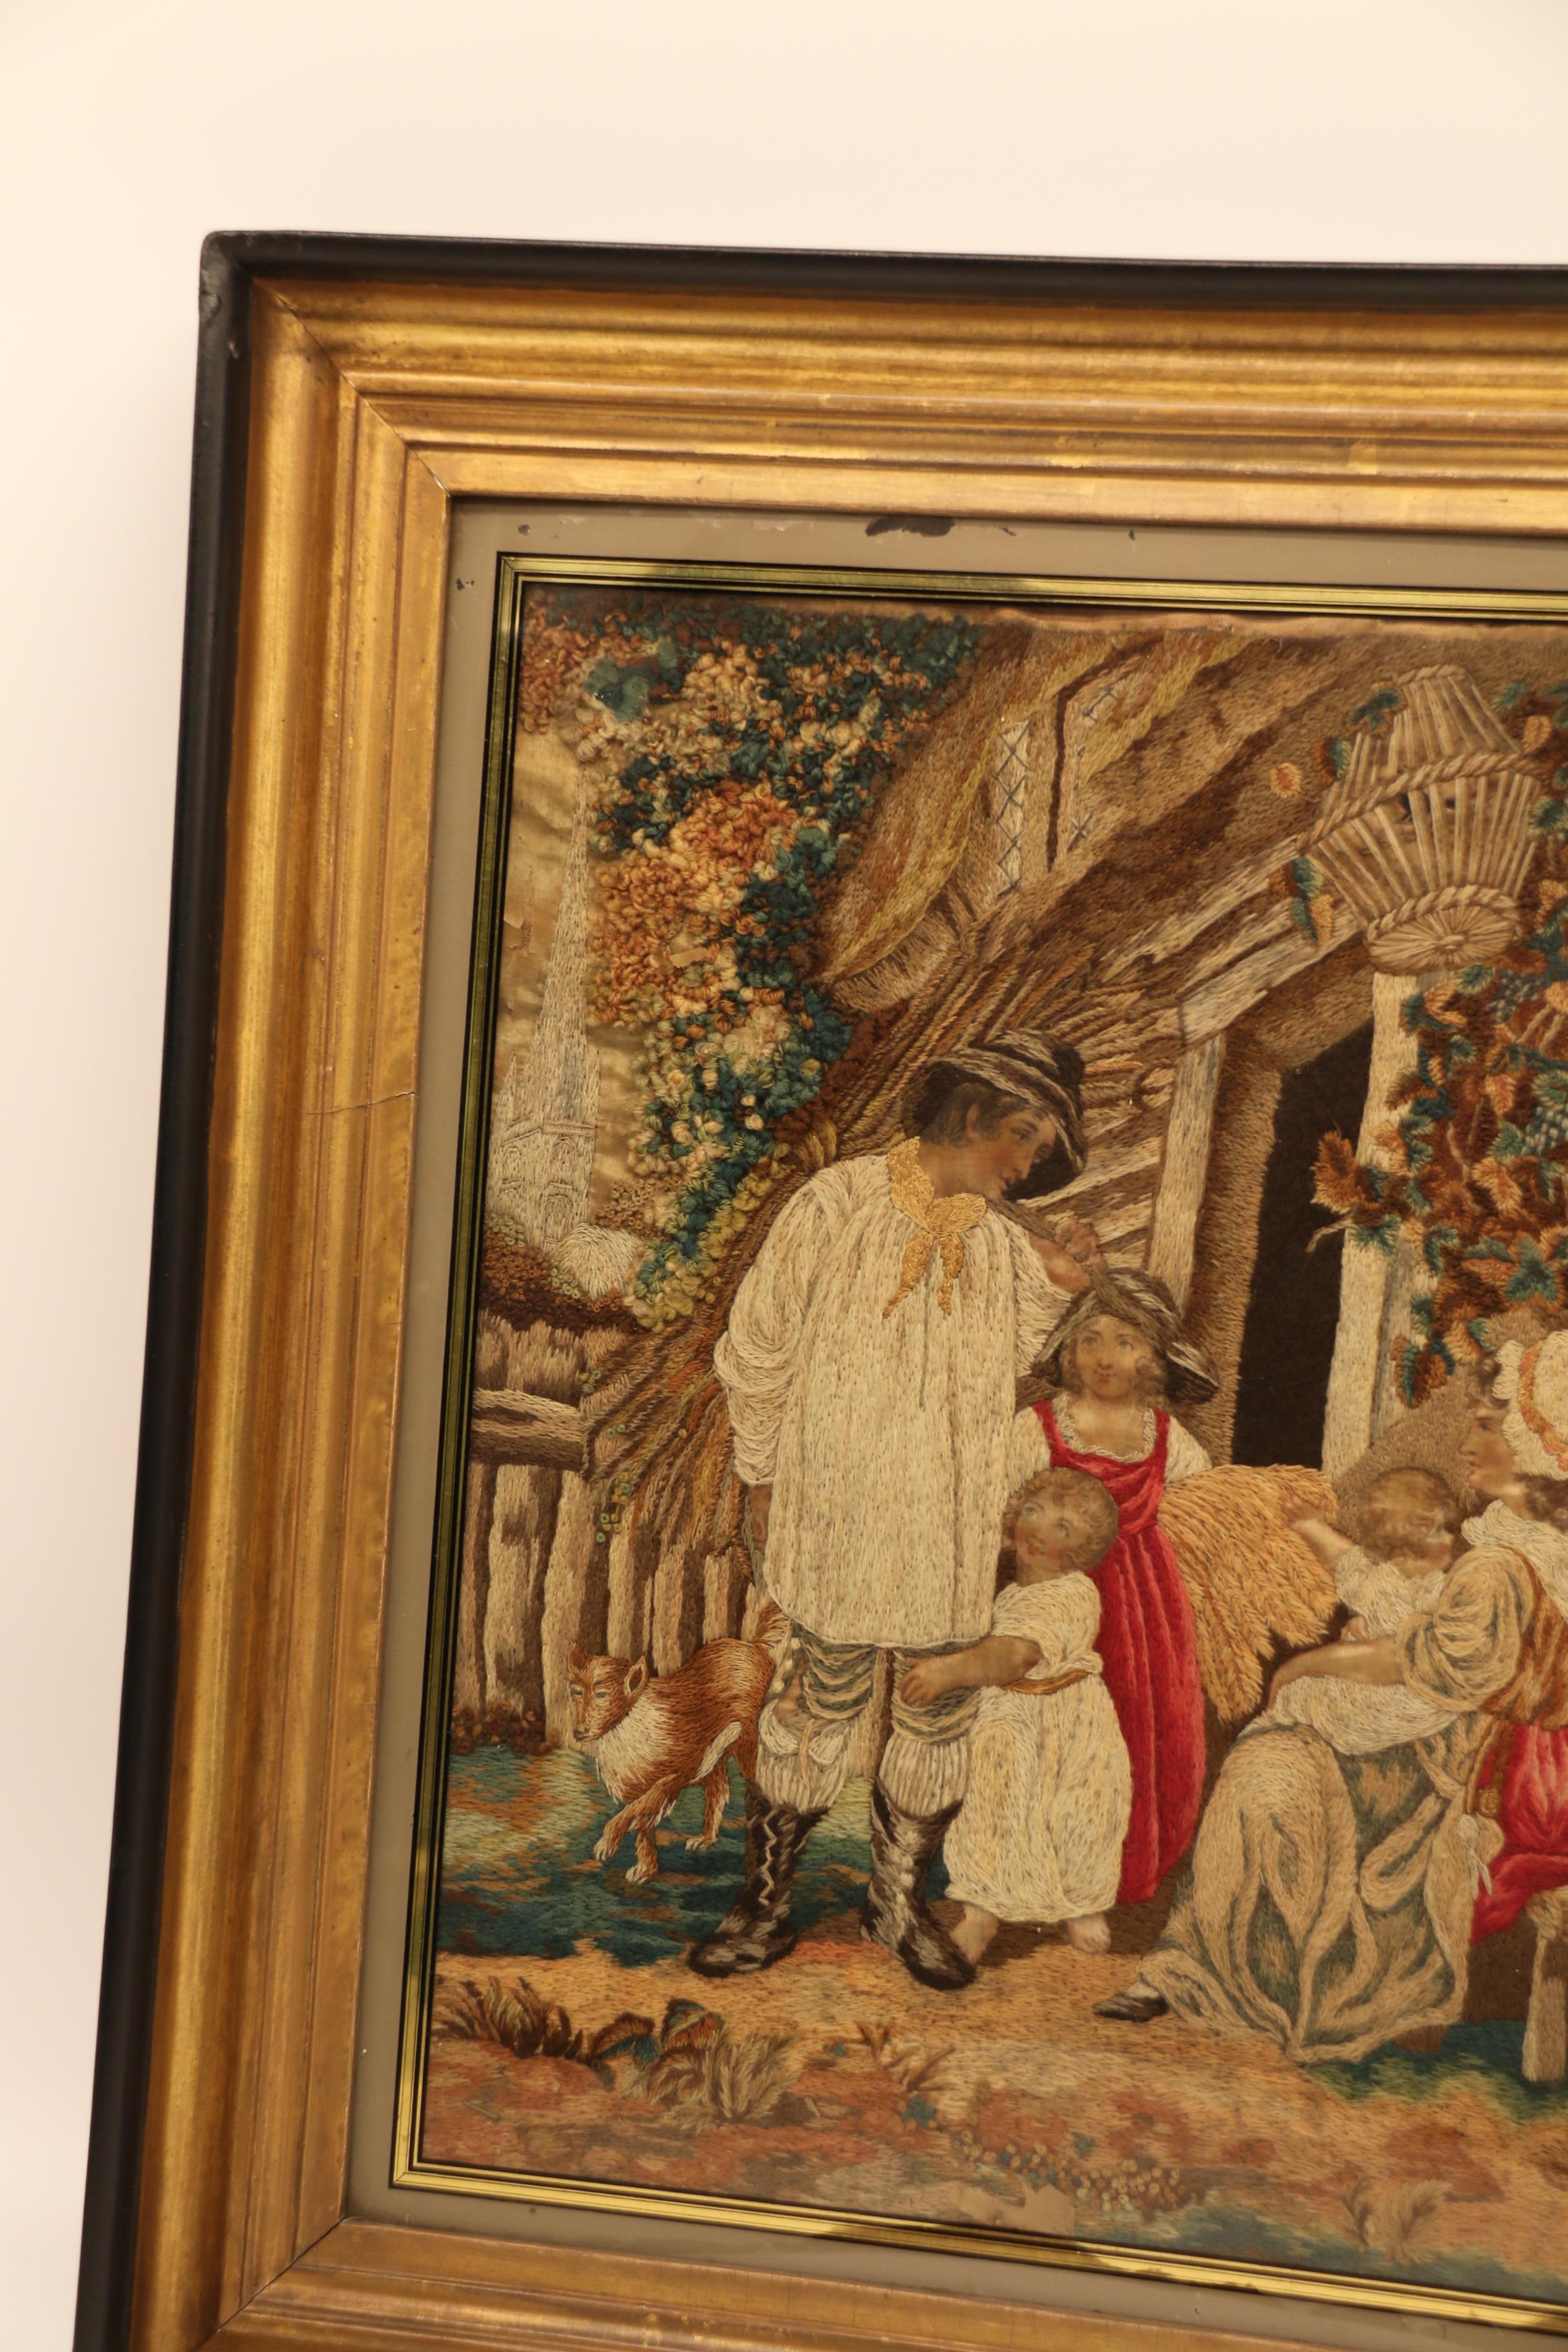 This exceptional needlework dates to the early 19th century and is a master class in the art of needlework. It incorporates many different types of thread and complicated stitches combined with hand painted silk used mainly for the faces and skin.